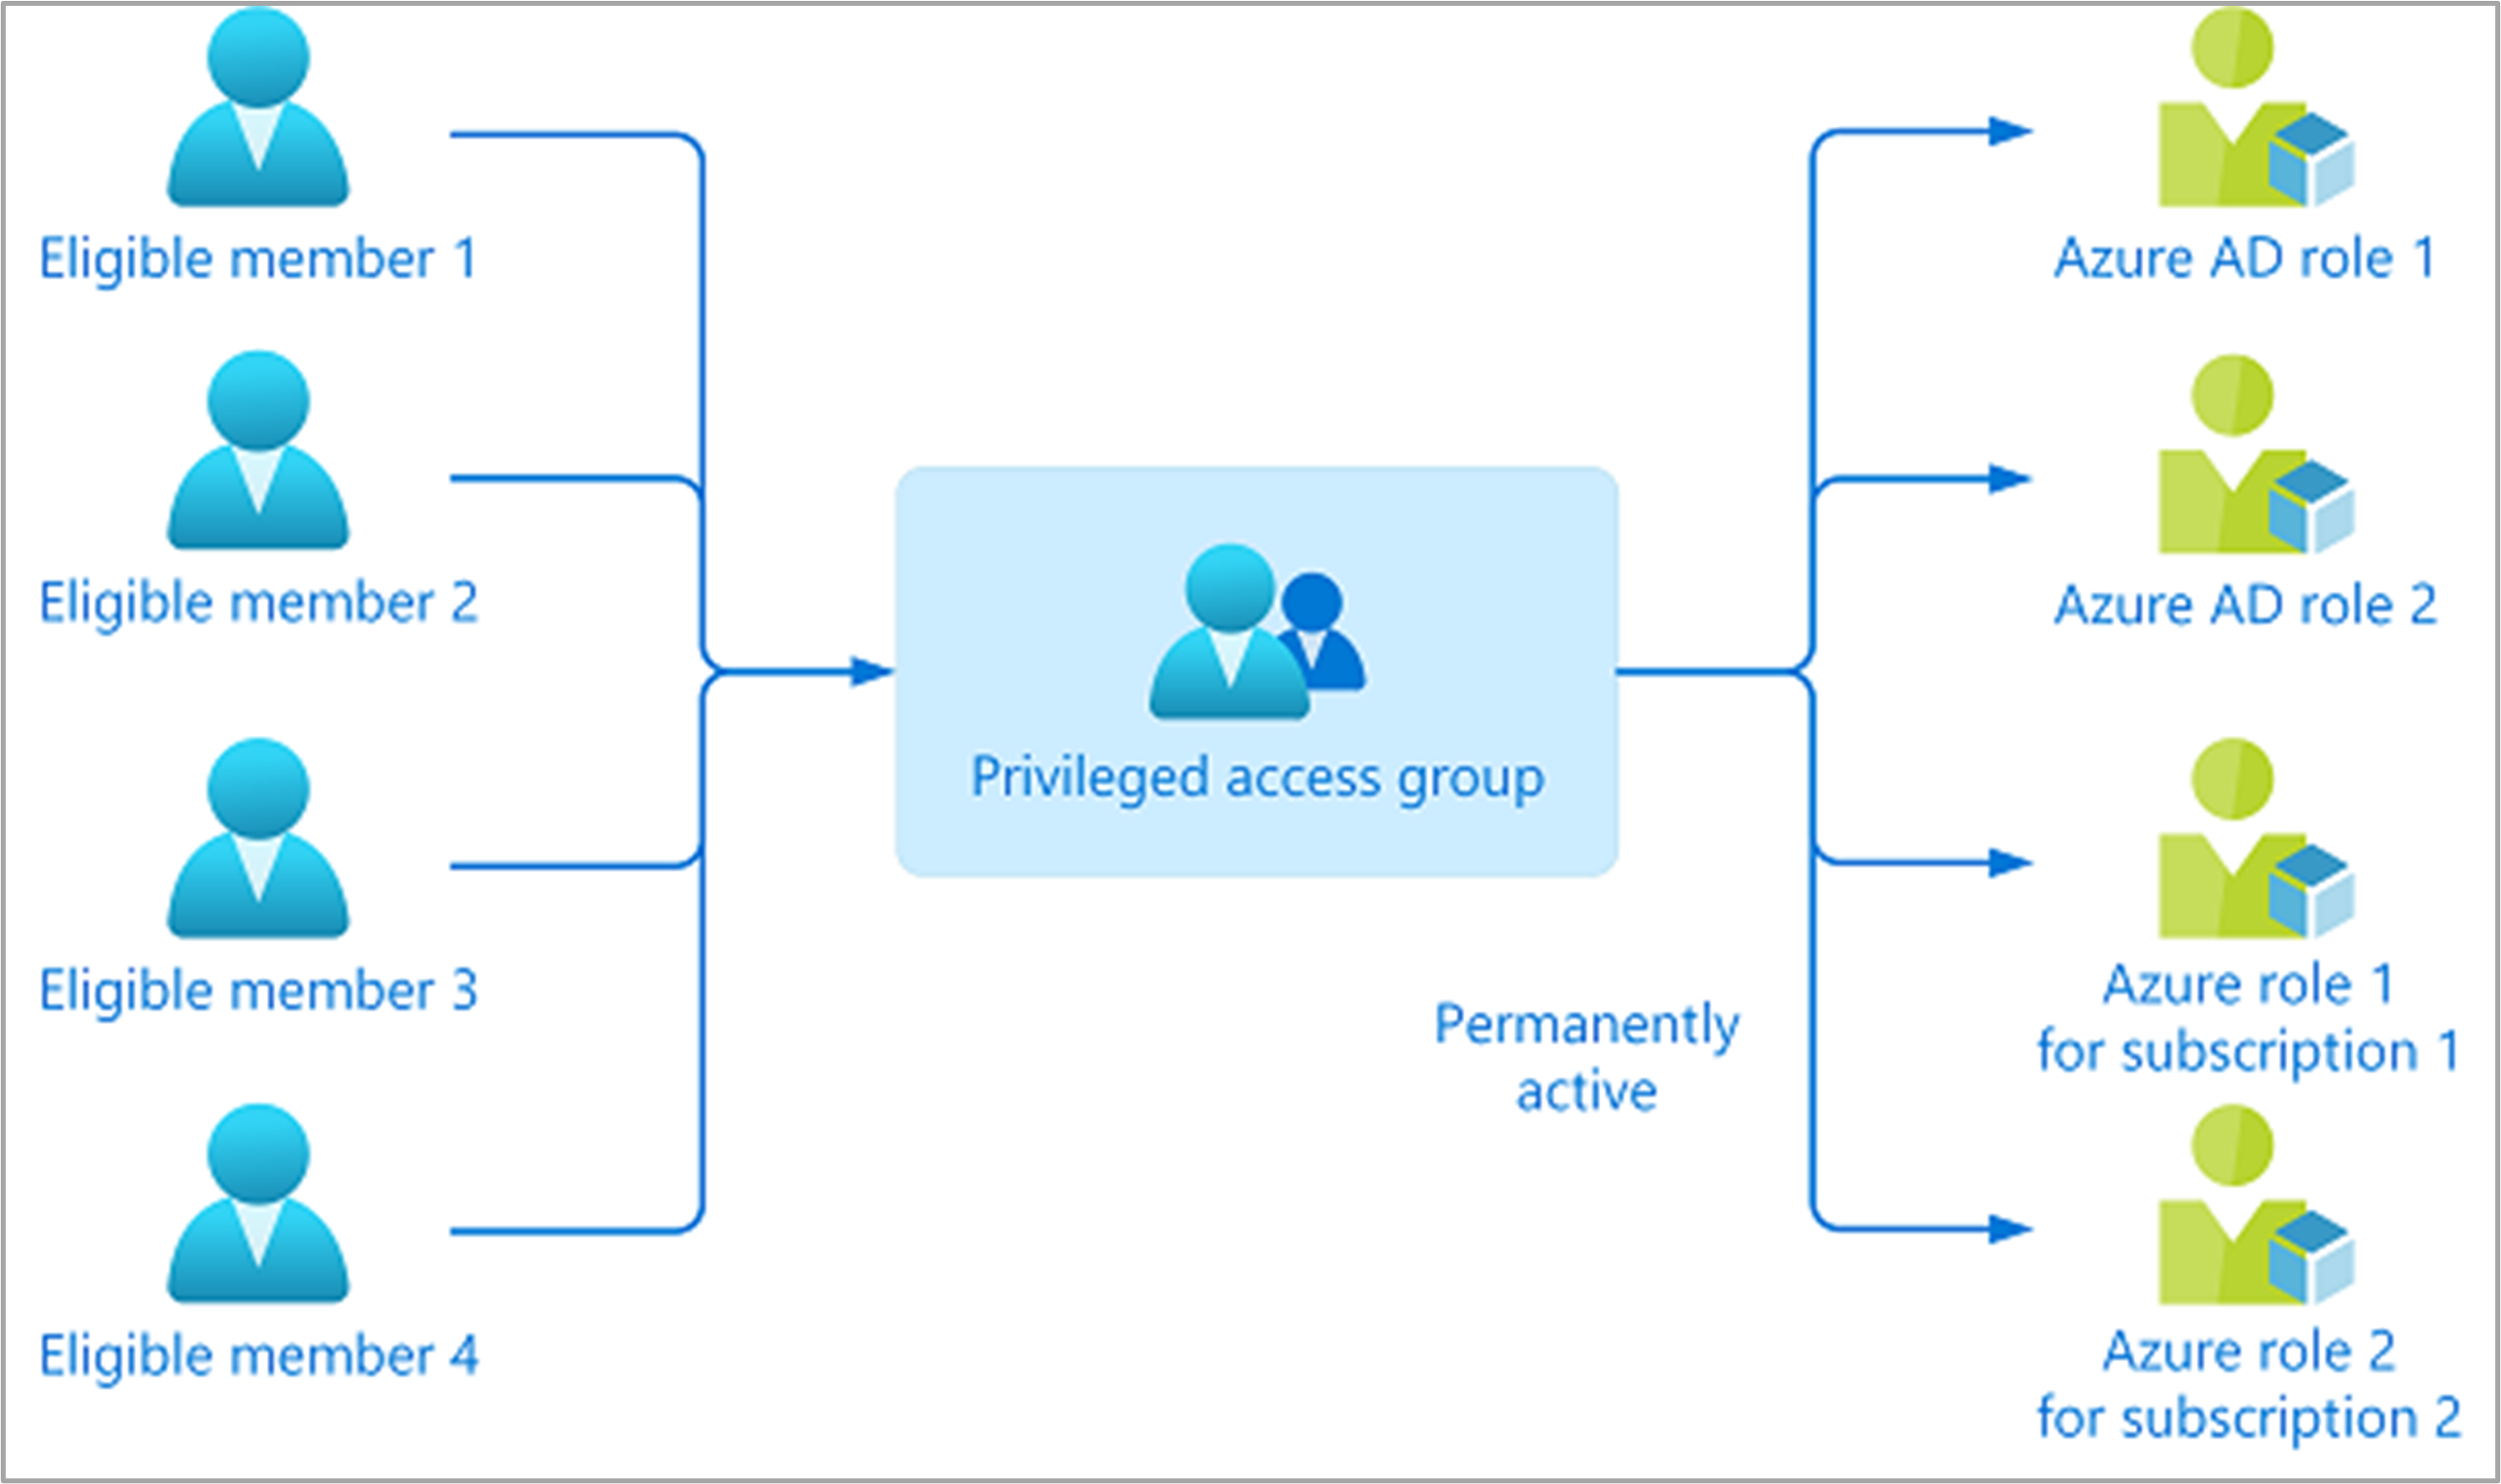 Assign eligibility for privileged access groups